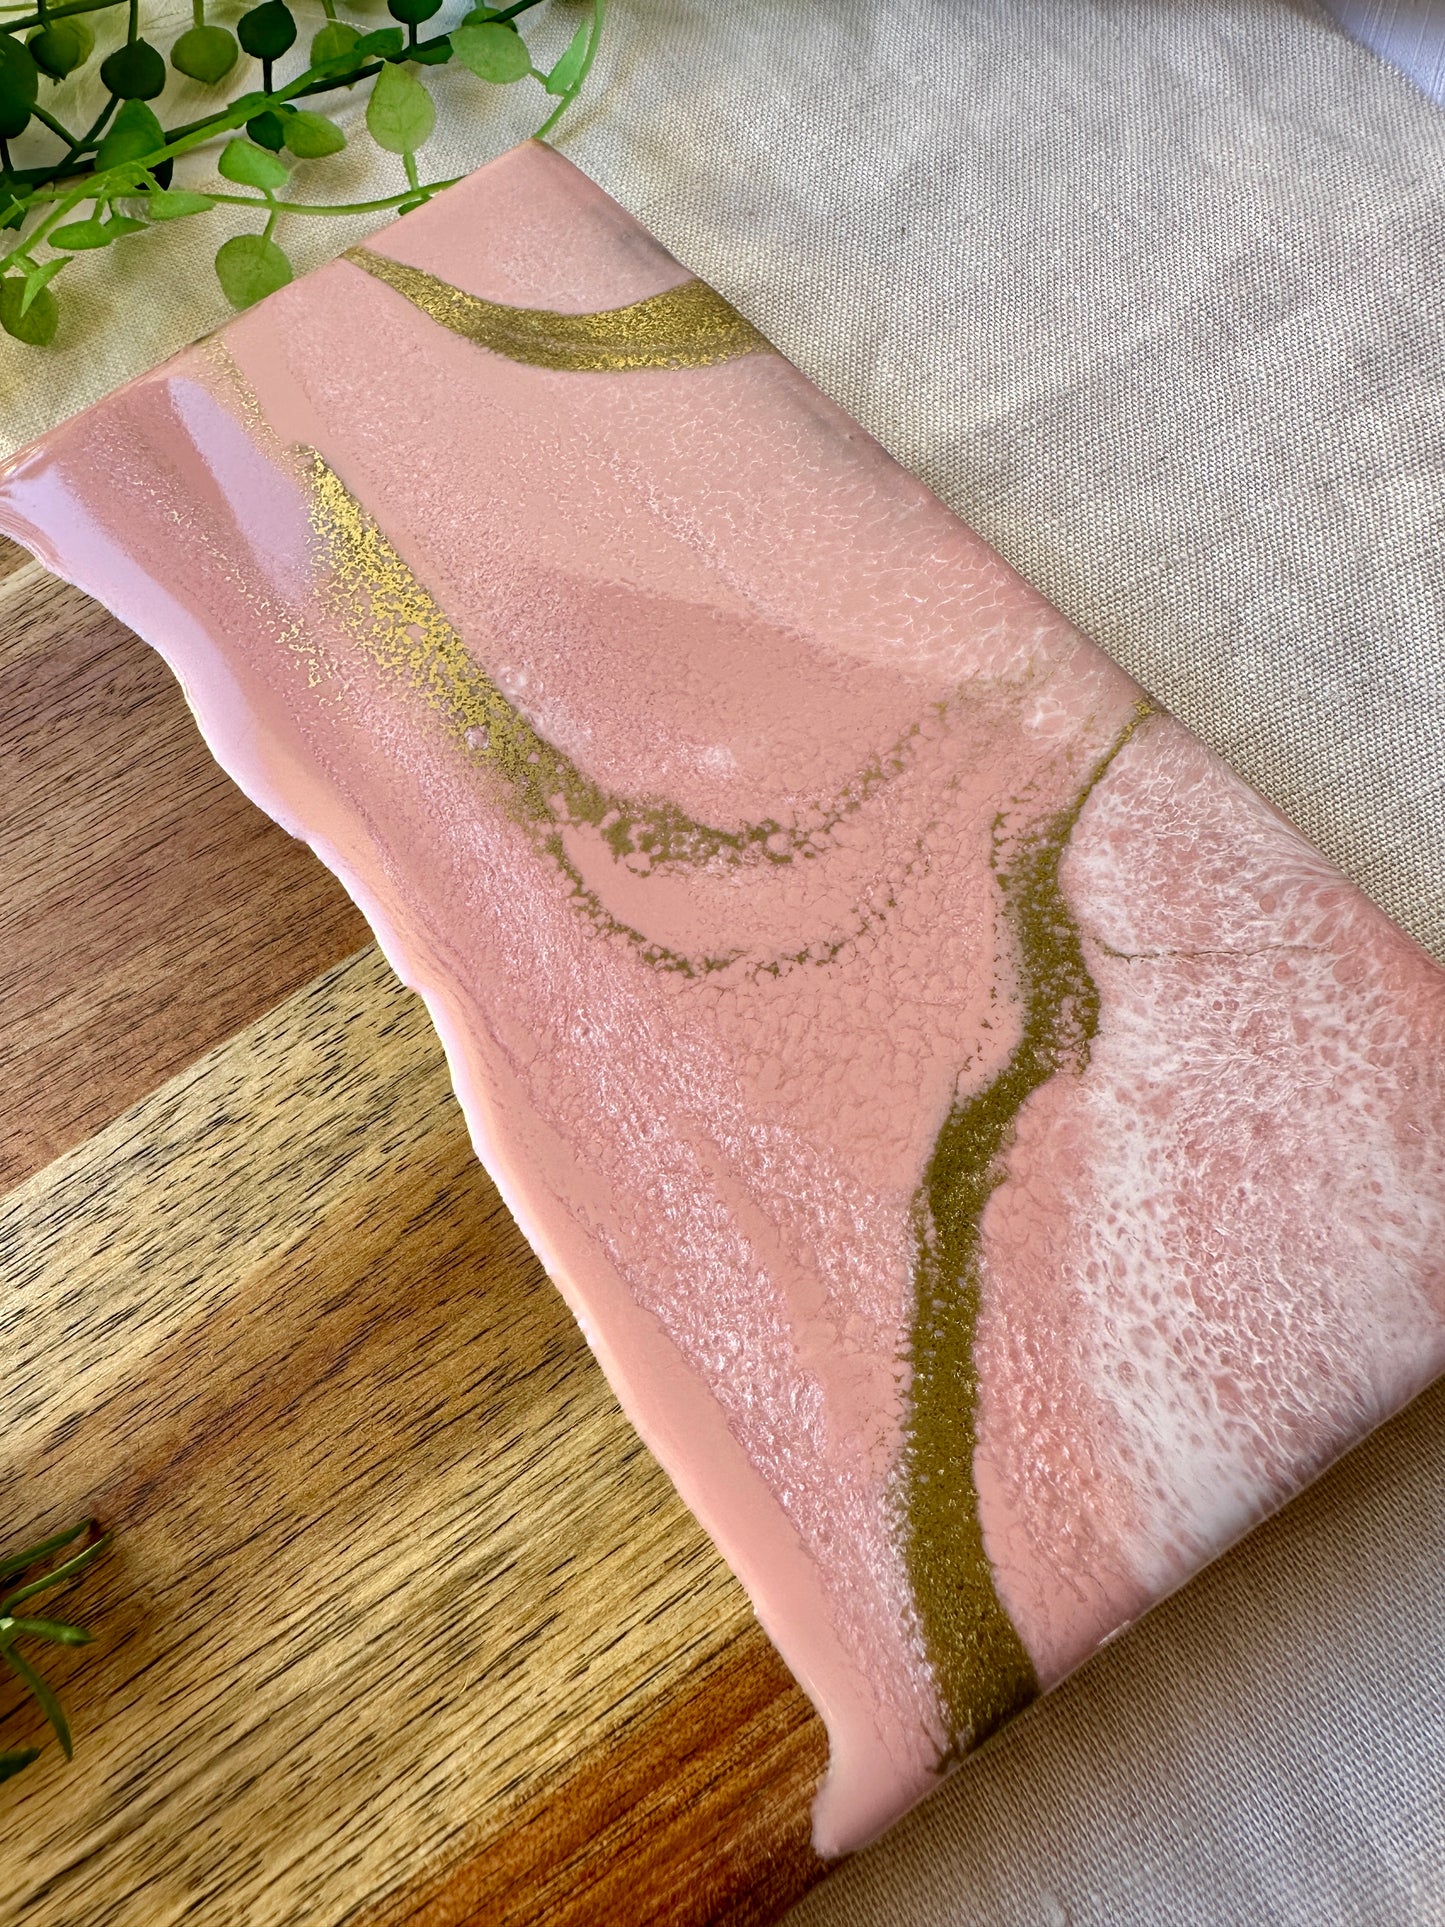 SERVING BOARD - blush pink and gold